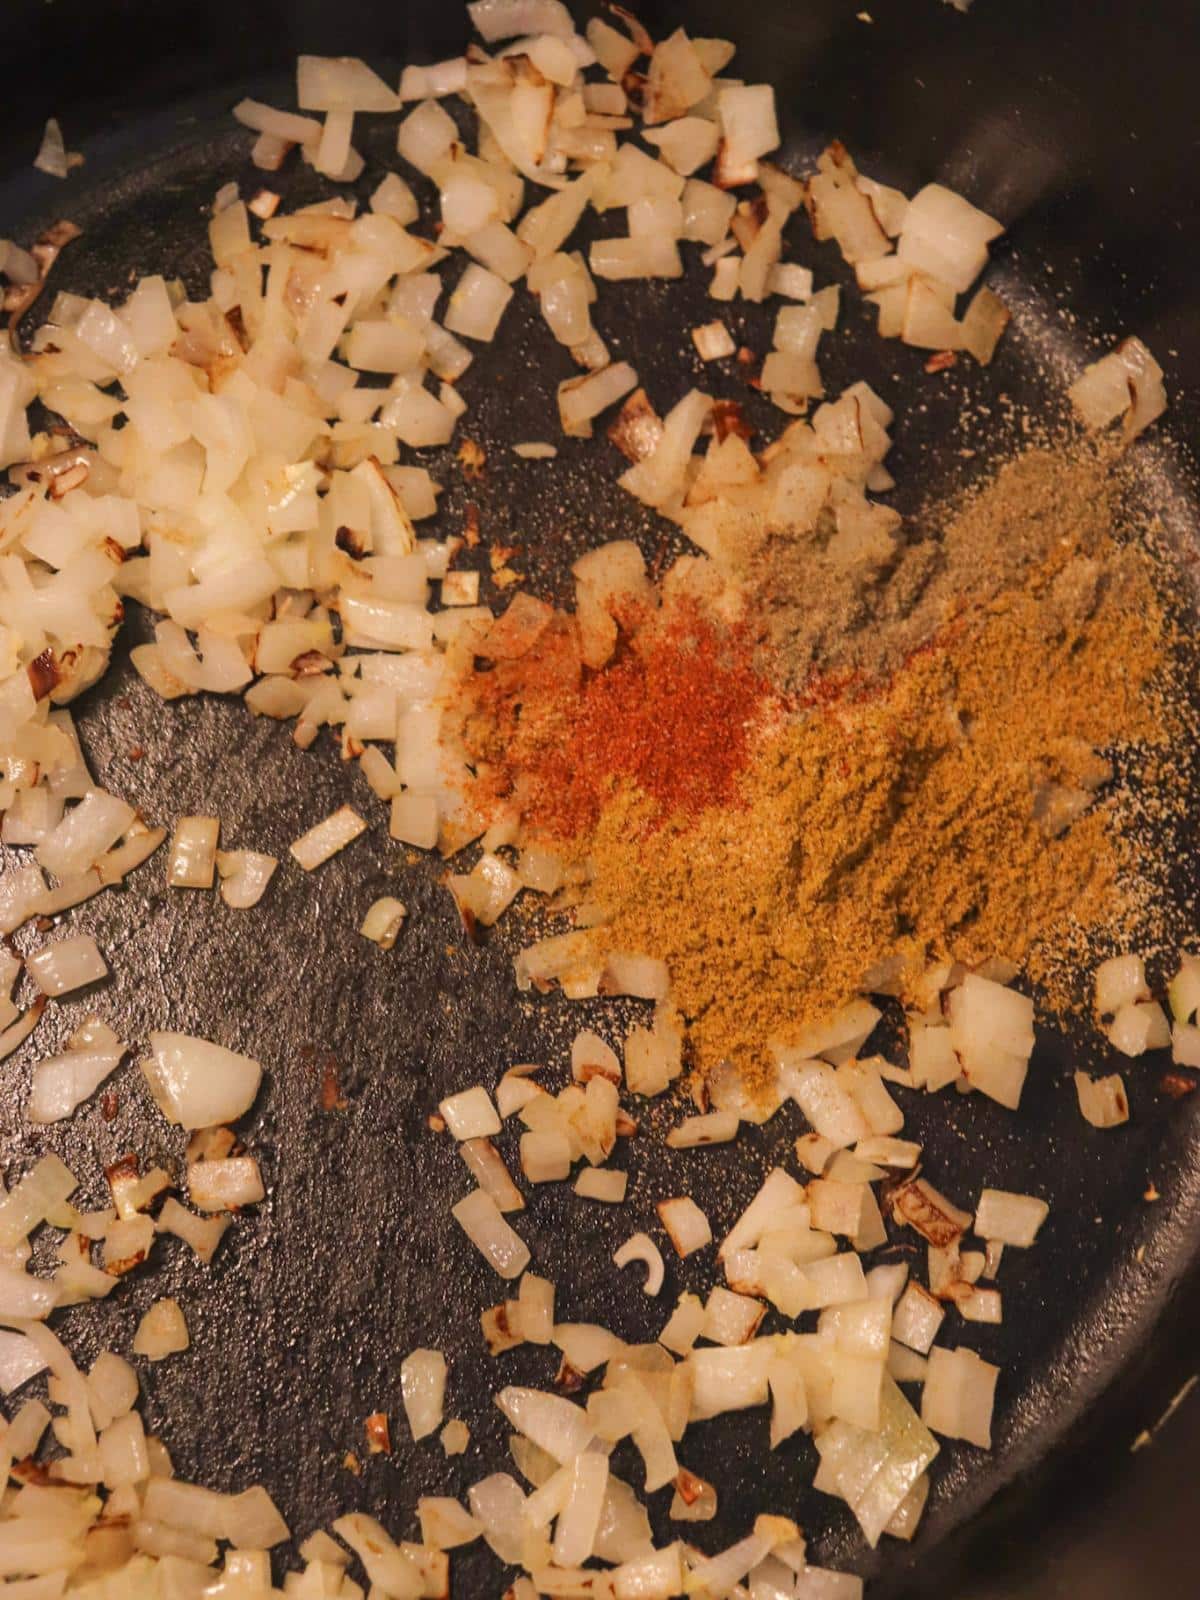 Onions and spices in a sauté pan on a stove.